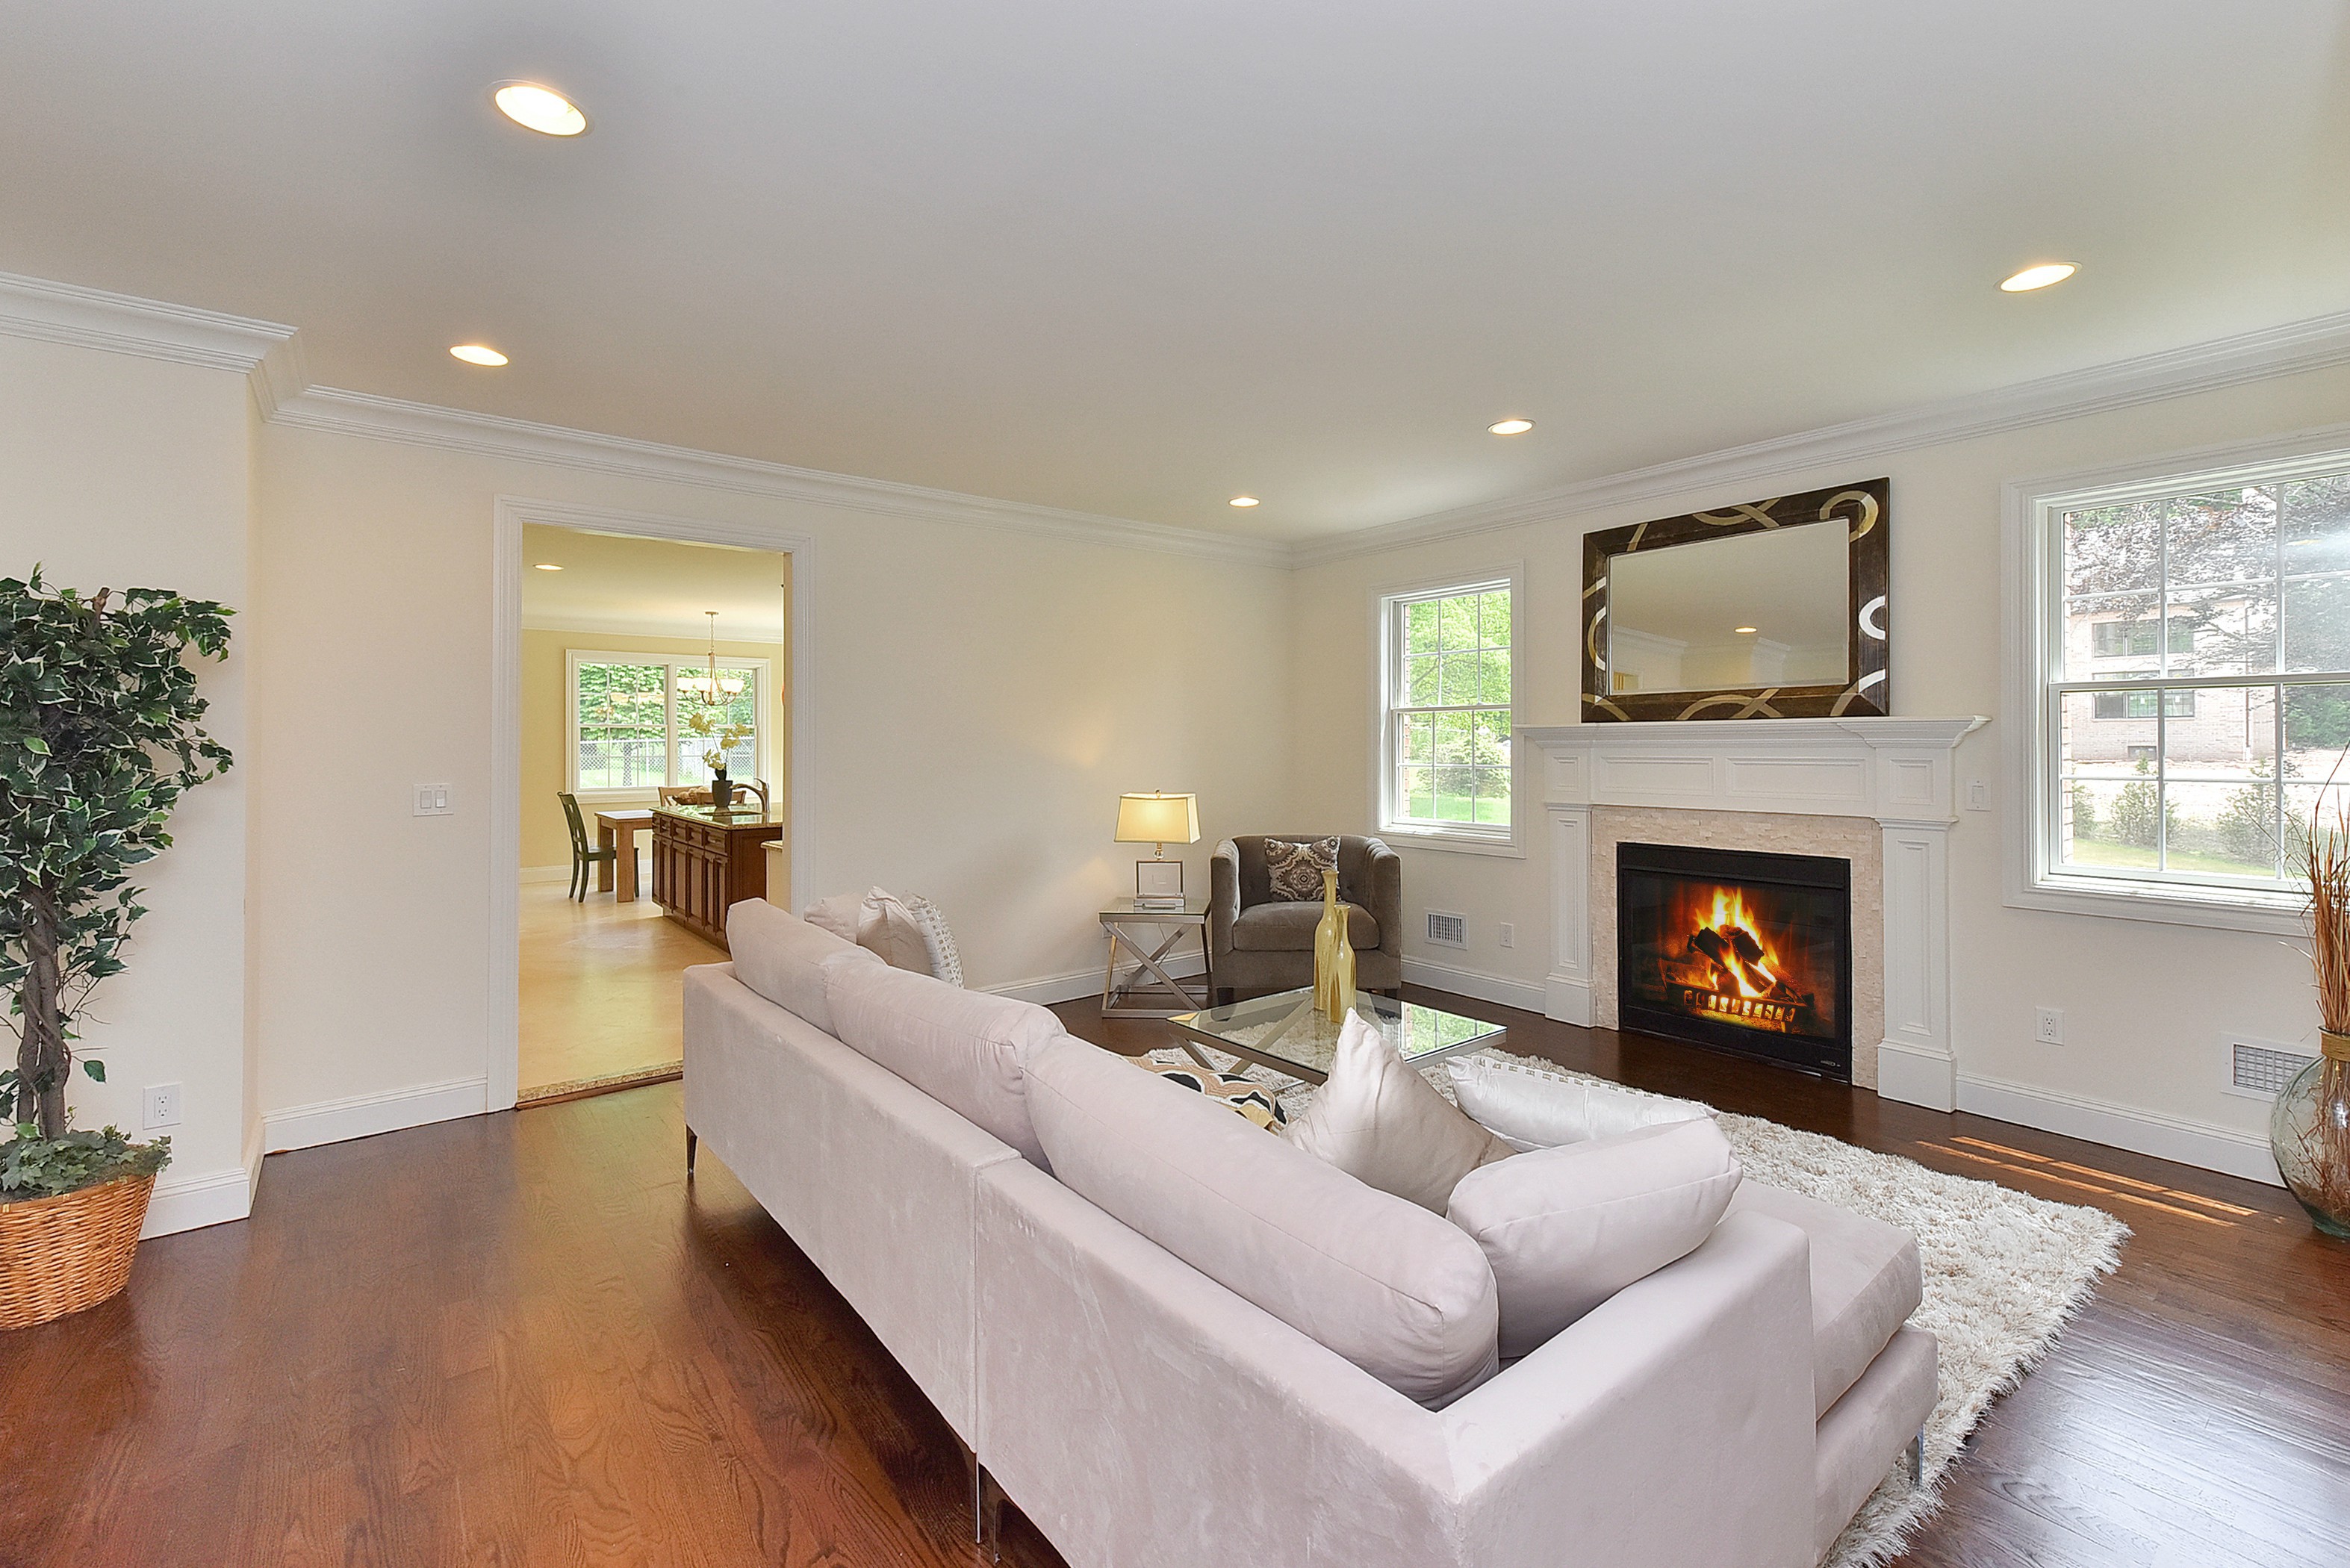 8 canterbury rd norwood nj 07648 living room with fireplace